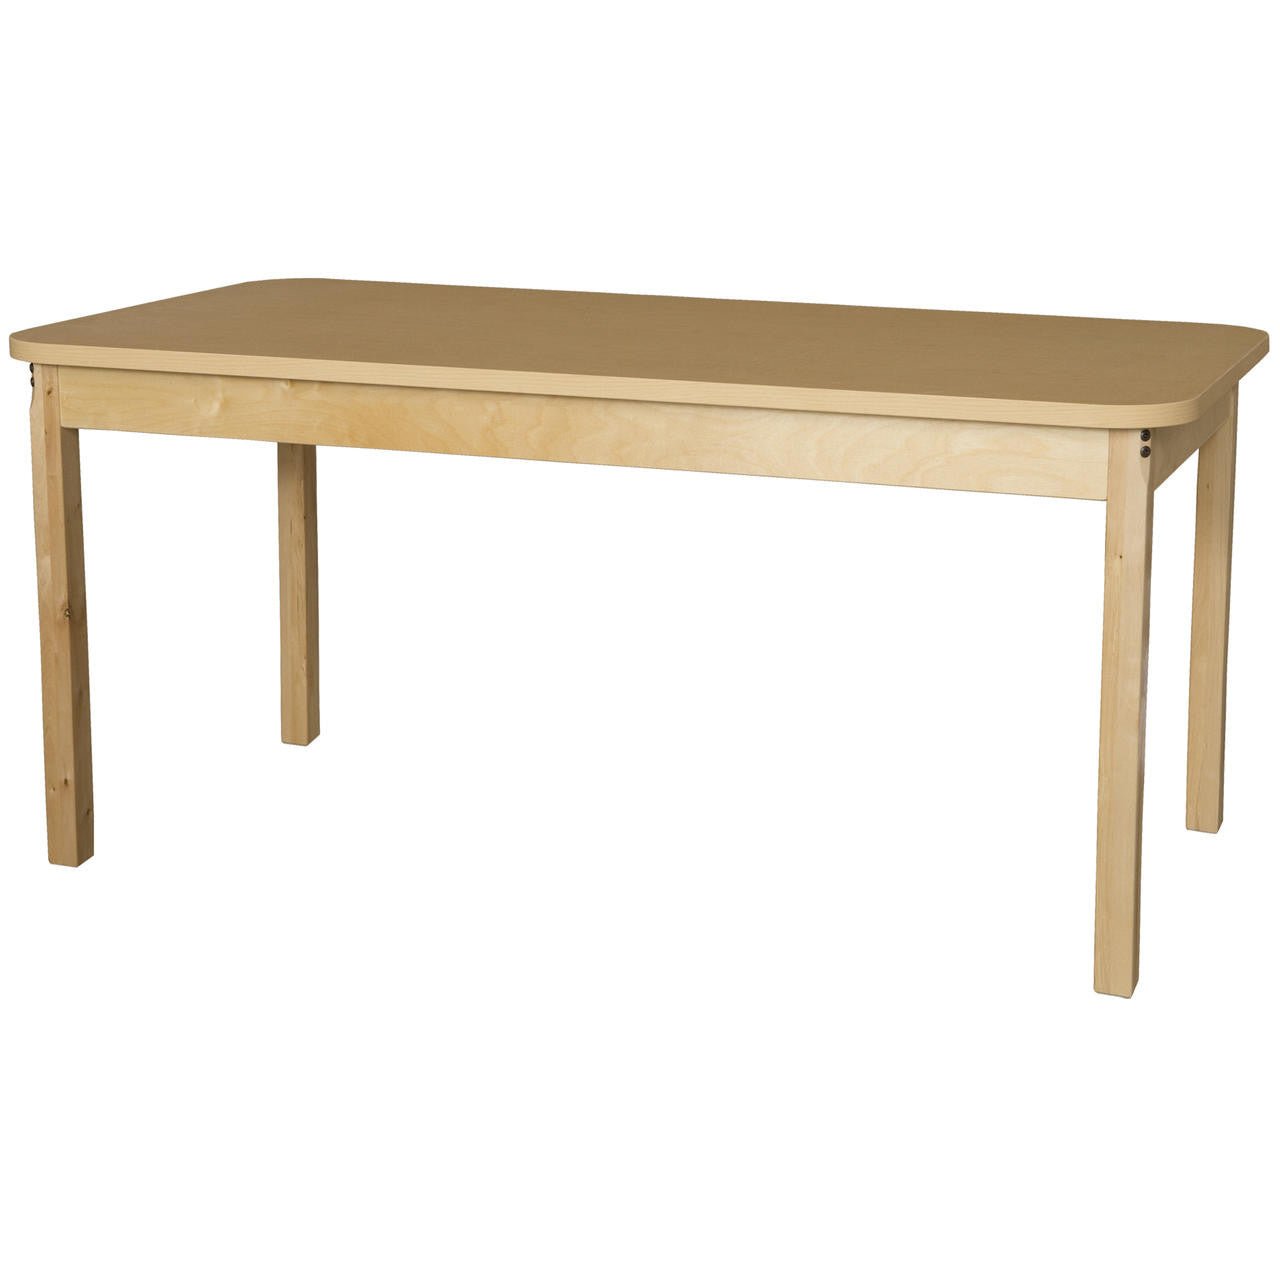 Rectangle High Pressure Laminate Table with Hardwood Legs- 26